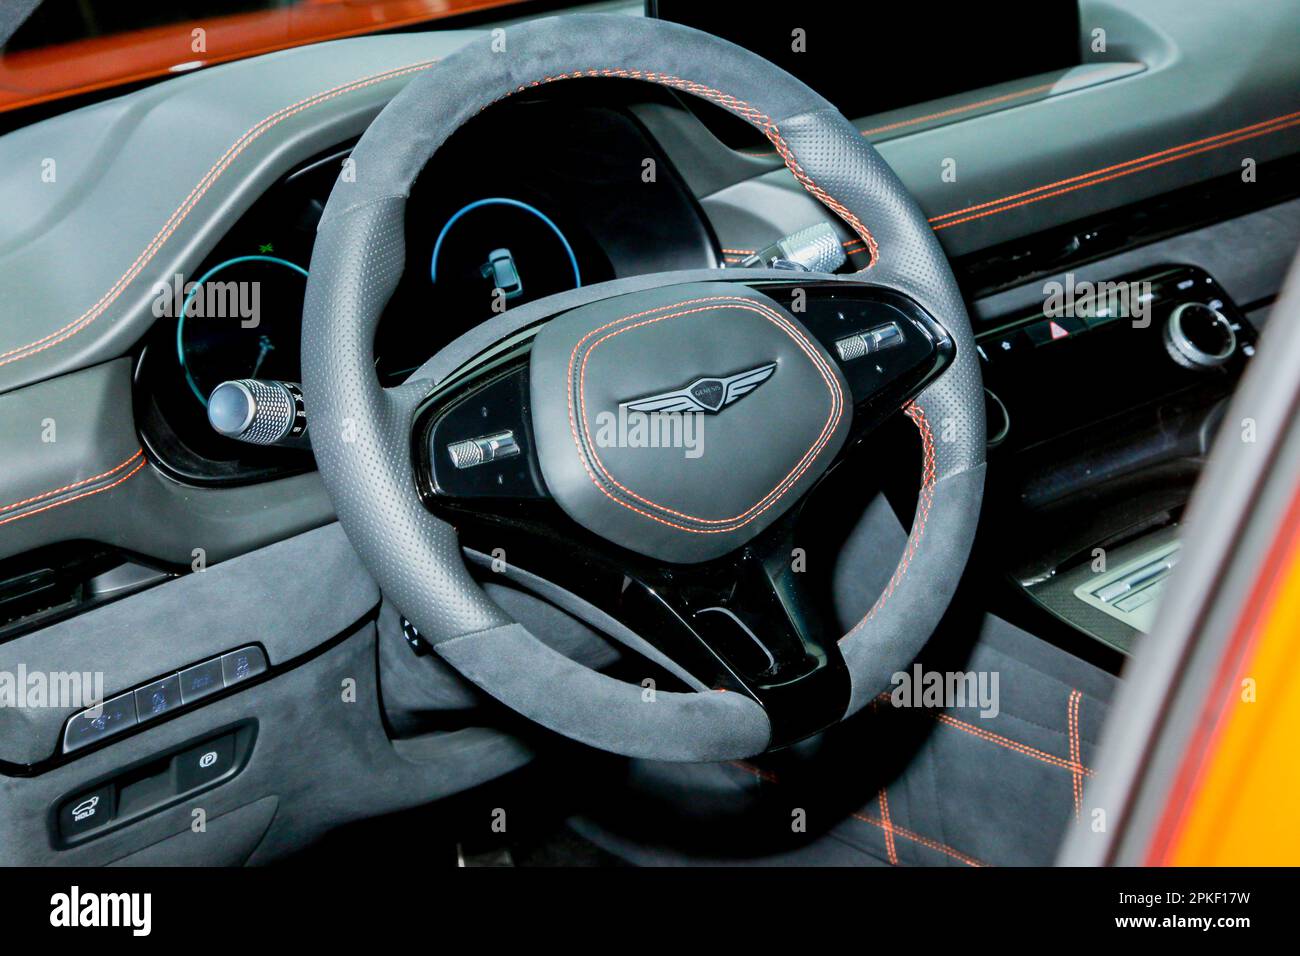 NEW YORK, NY, USA - APRIL 5, 2023: Genesis GV 80 coupe concept showing at New York International Auto Show Stock Photo